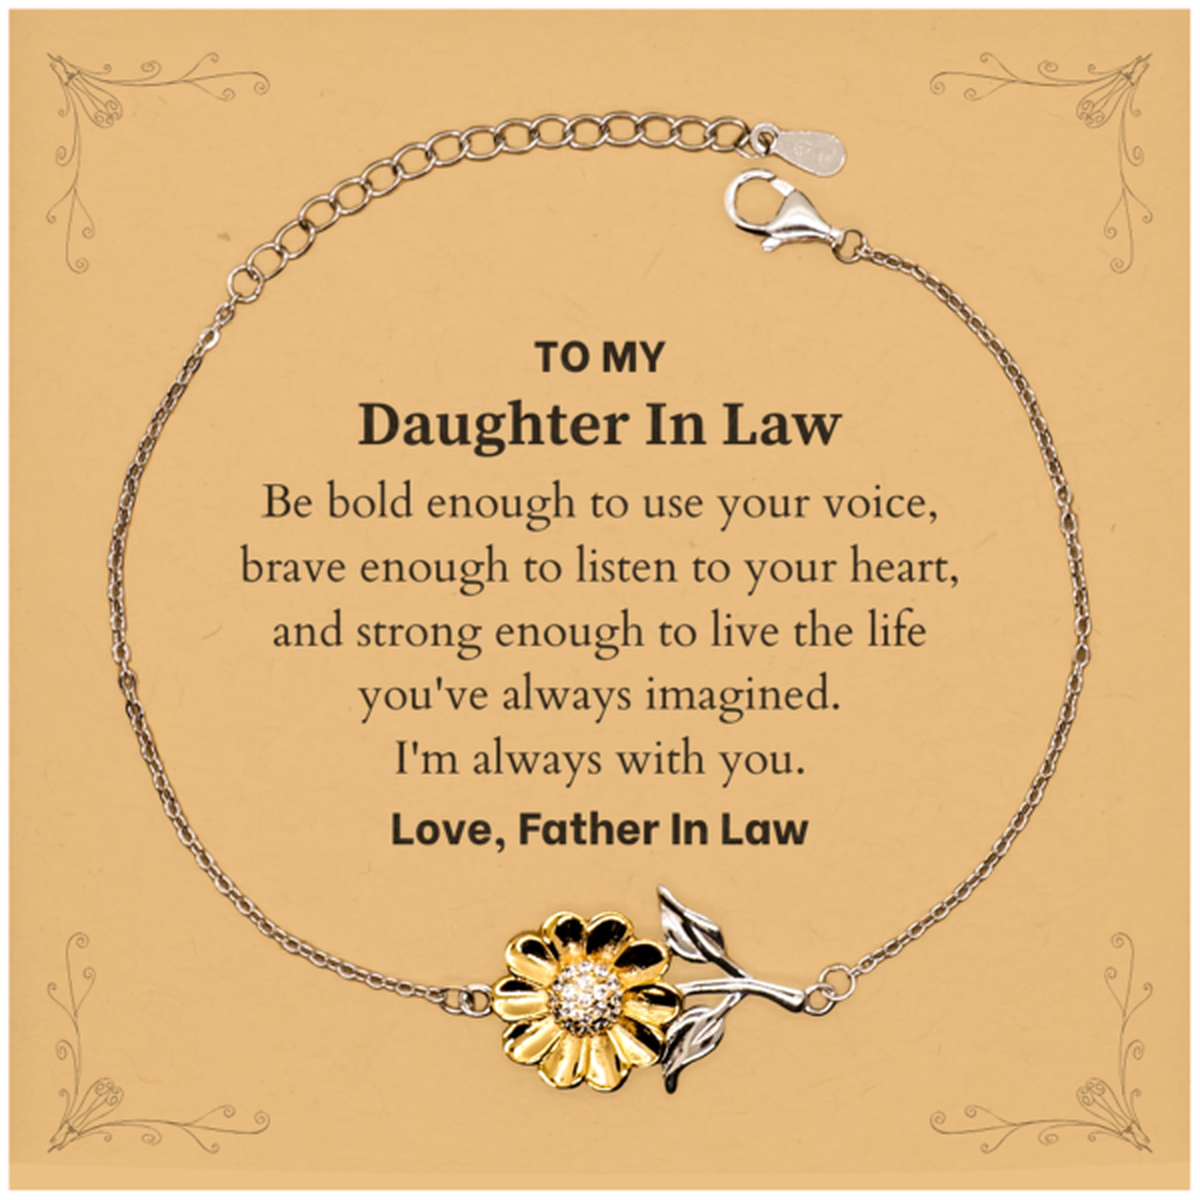 Keepsake Daughter In Law Sunflower Bracelet Gift Idea Graduation Christmas Birthday Daughter In Law from Father In Law, Daughter In Law Be bold enough to use your voice, brave enough to listen to your heart. Love, Father In Law